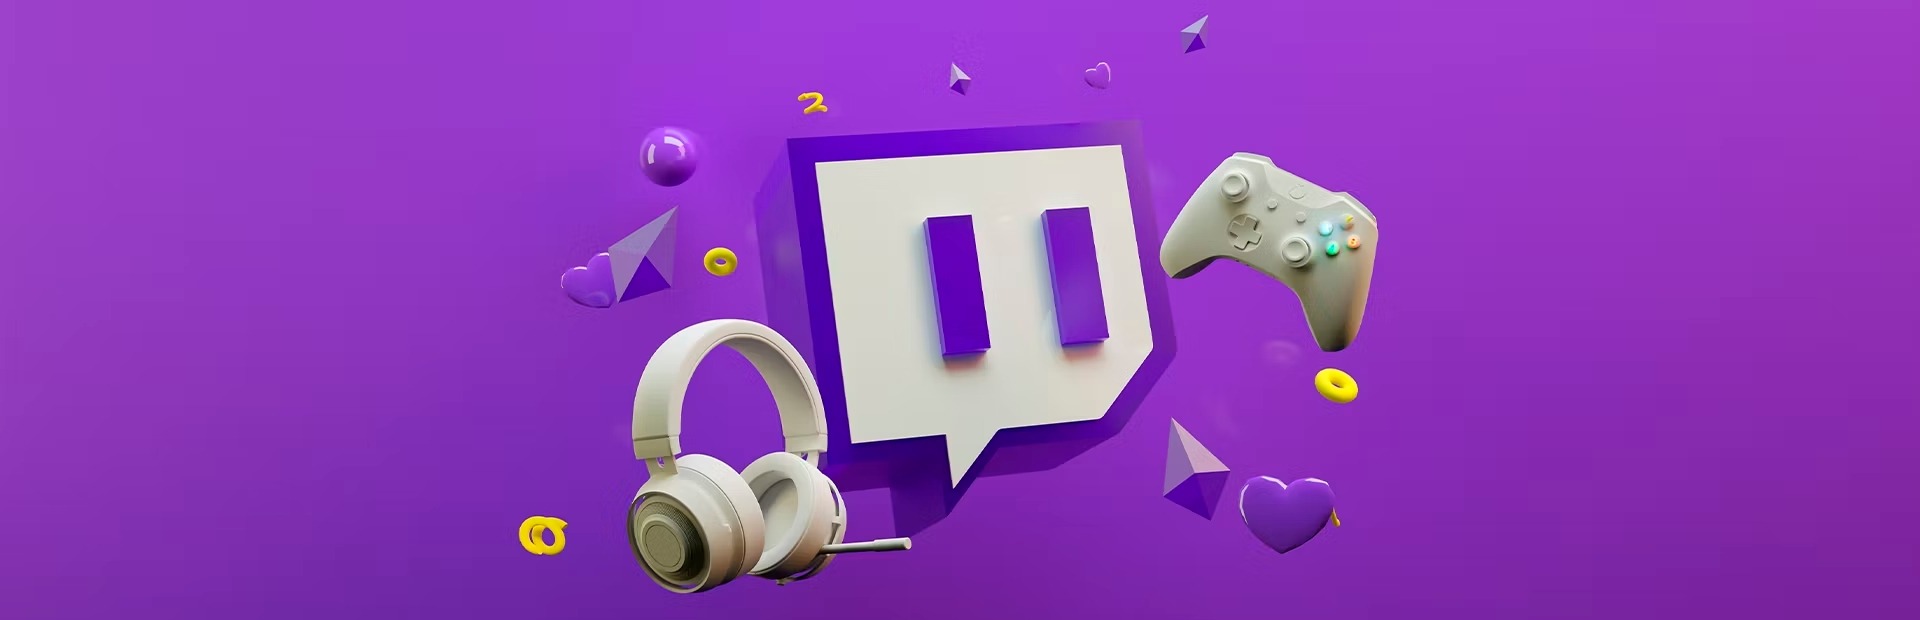 Twitch Gift Card 15€